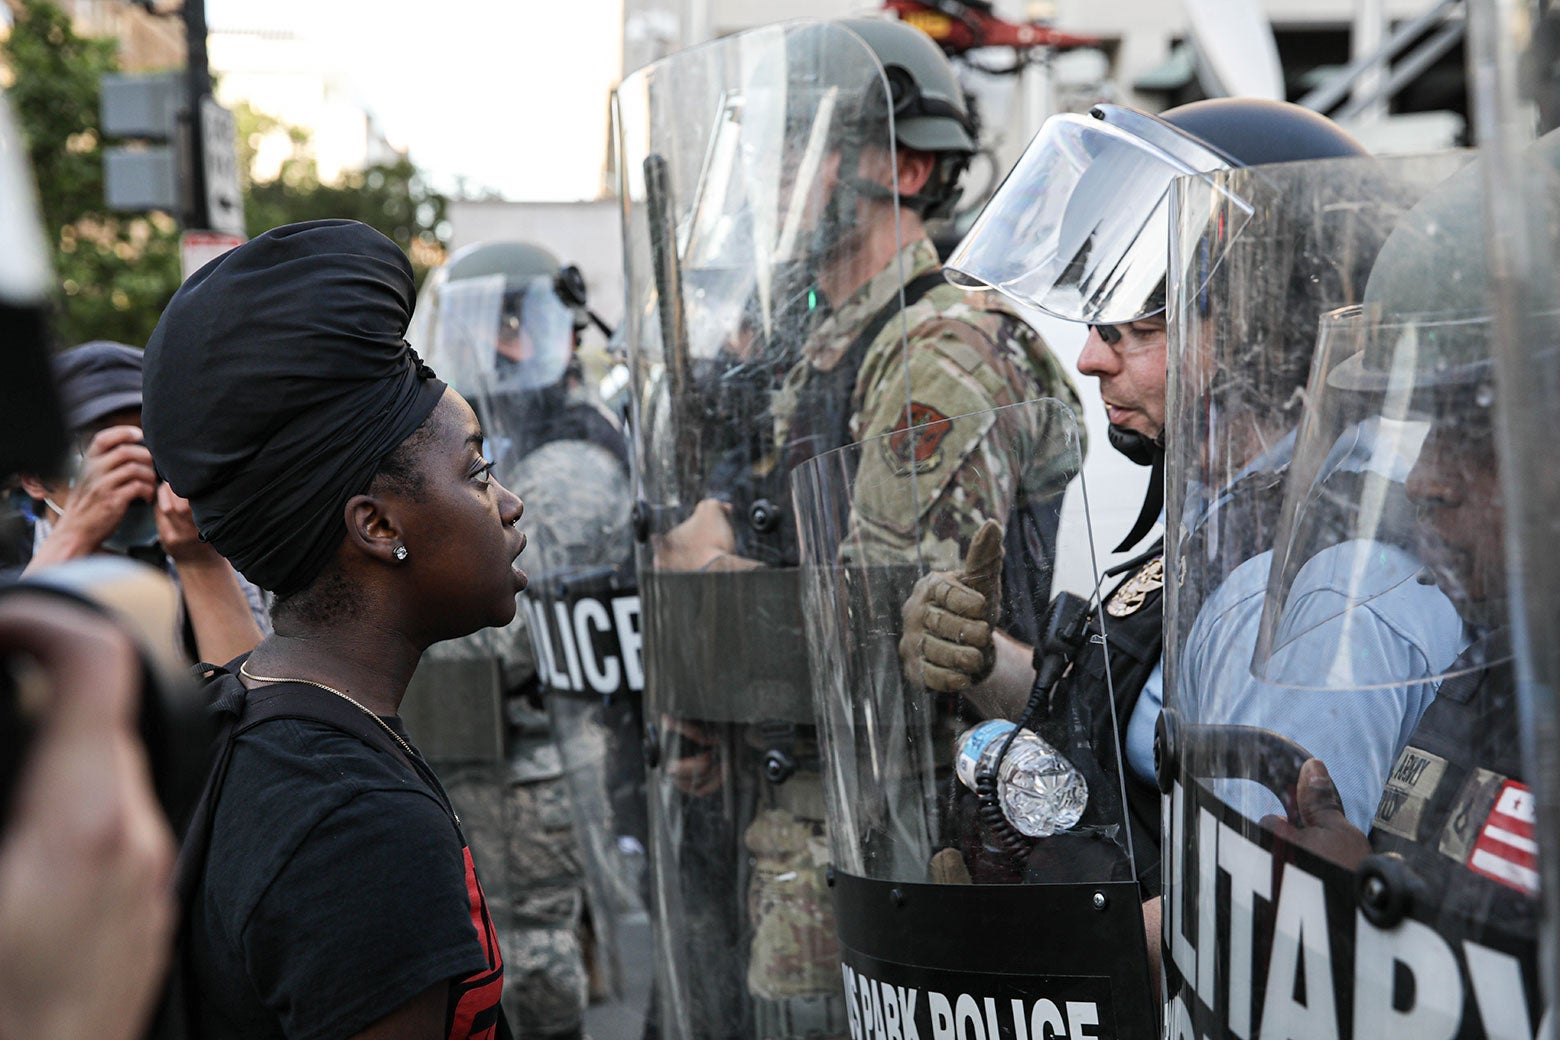 A protester directly faces officers who are carrying shields and blocking the road.